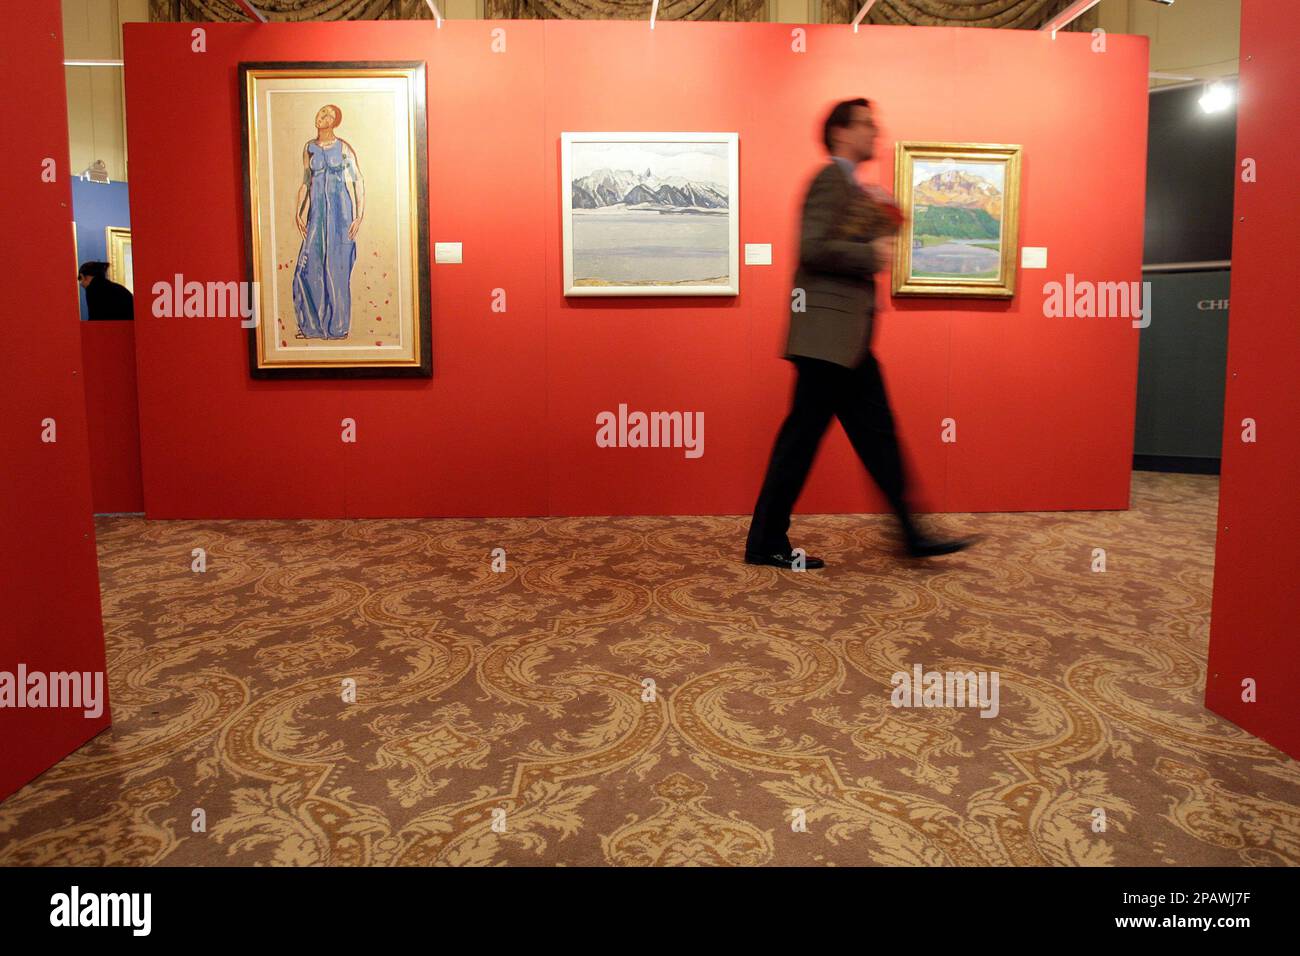 A Christie's employee displays the painting "Thunersee mit Stockhornkette  im Winter" painted in 1912/13 by Swiss artist Ferdinand Hodler, during a  viewing in Geneva, Switzerland, Friday, Nov. 9, 2007. The painting will